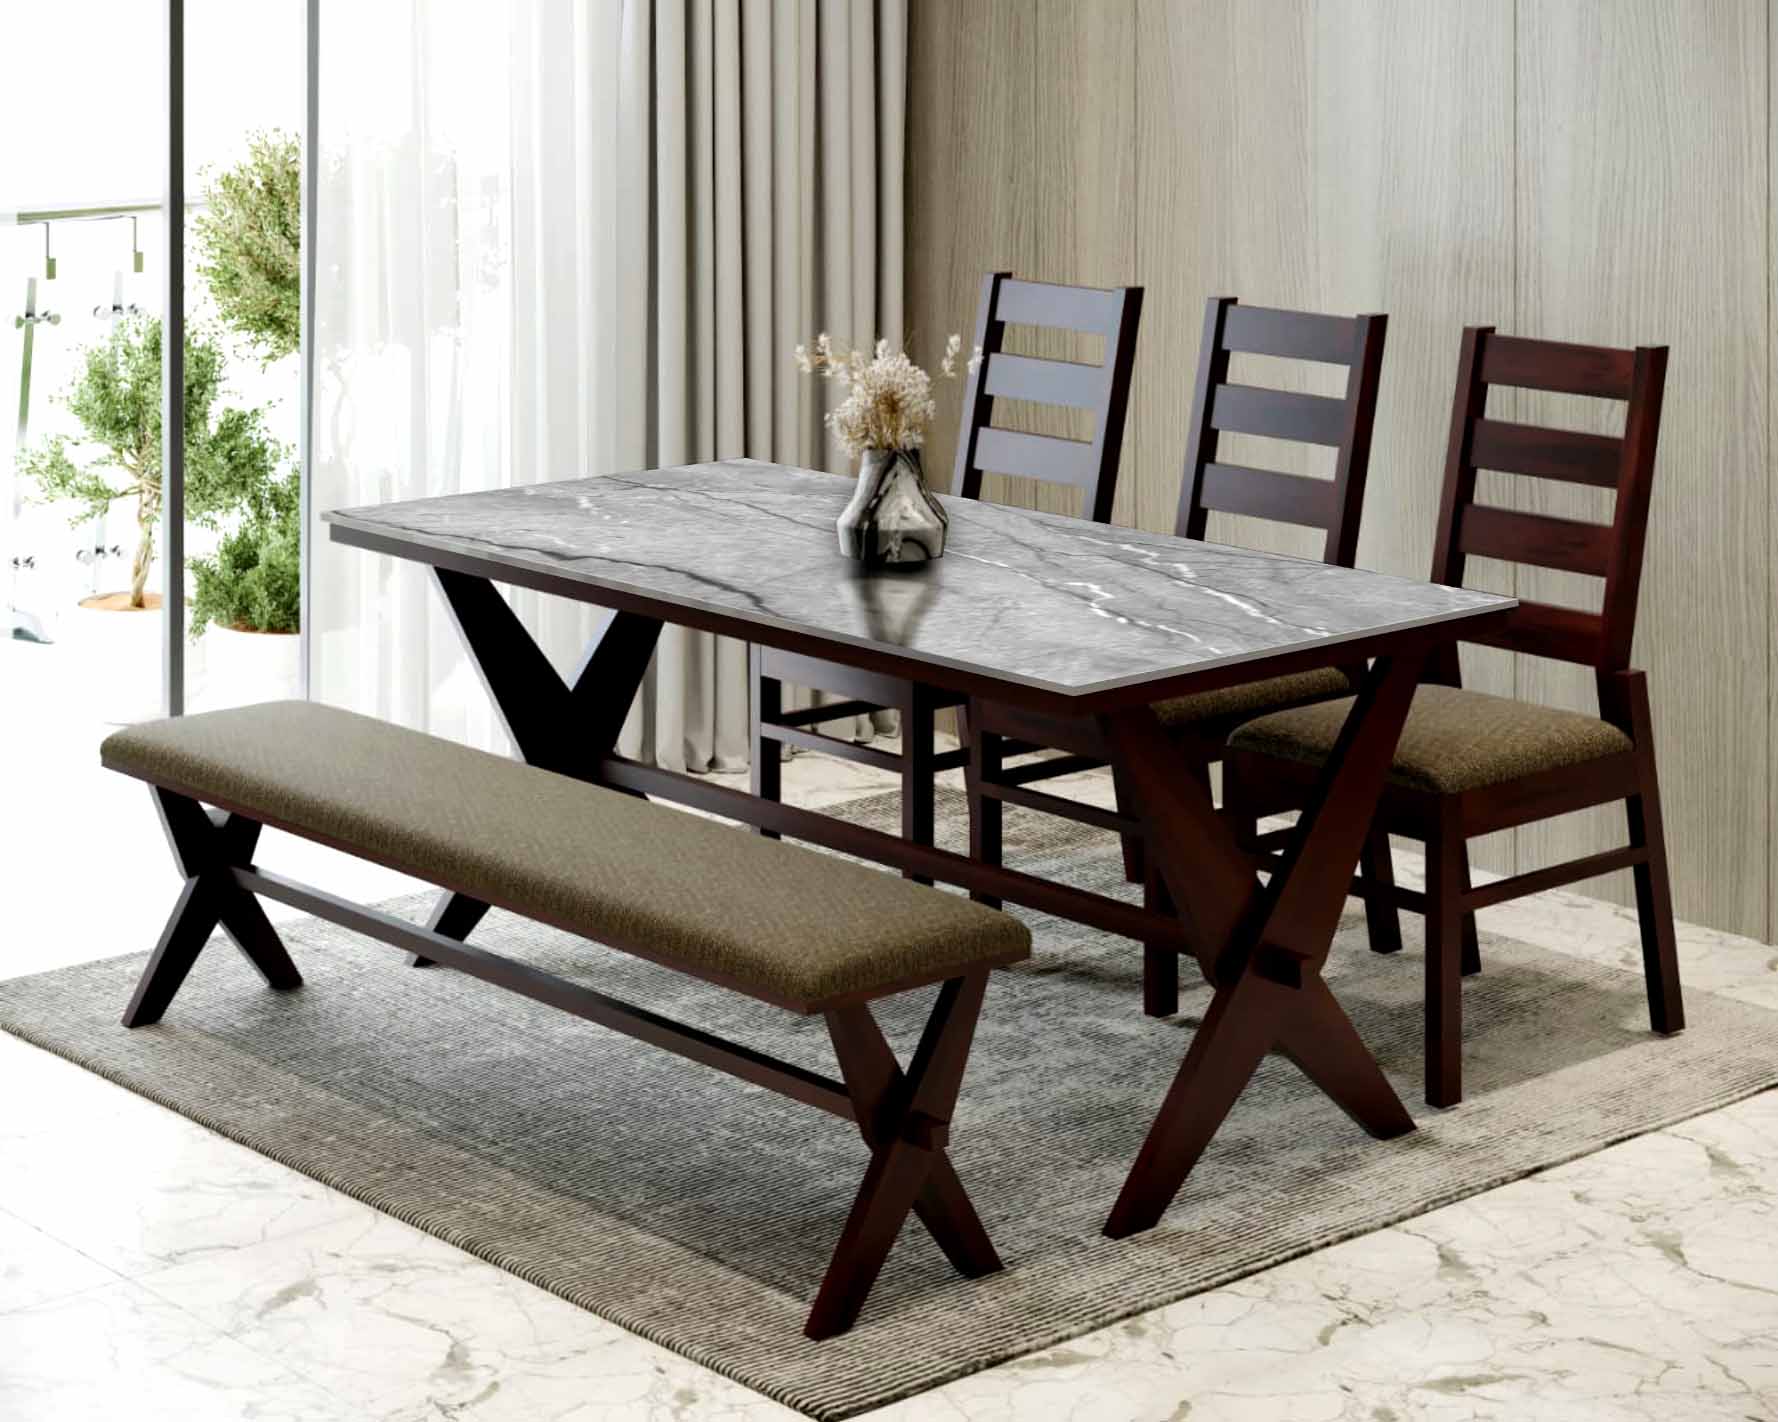 Hudson 6 Seater Dining Table 6 X 3 In Mahogany Choco Matt Finish With Marble Top